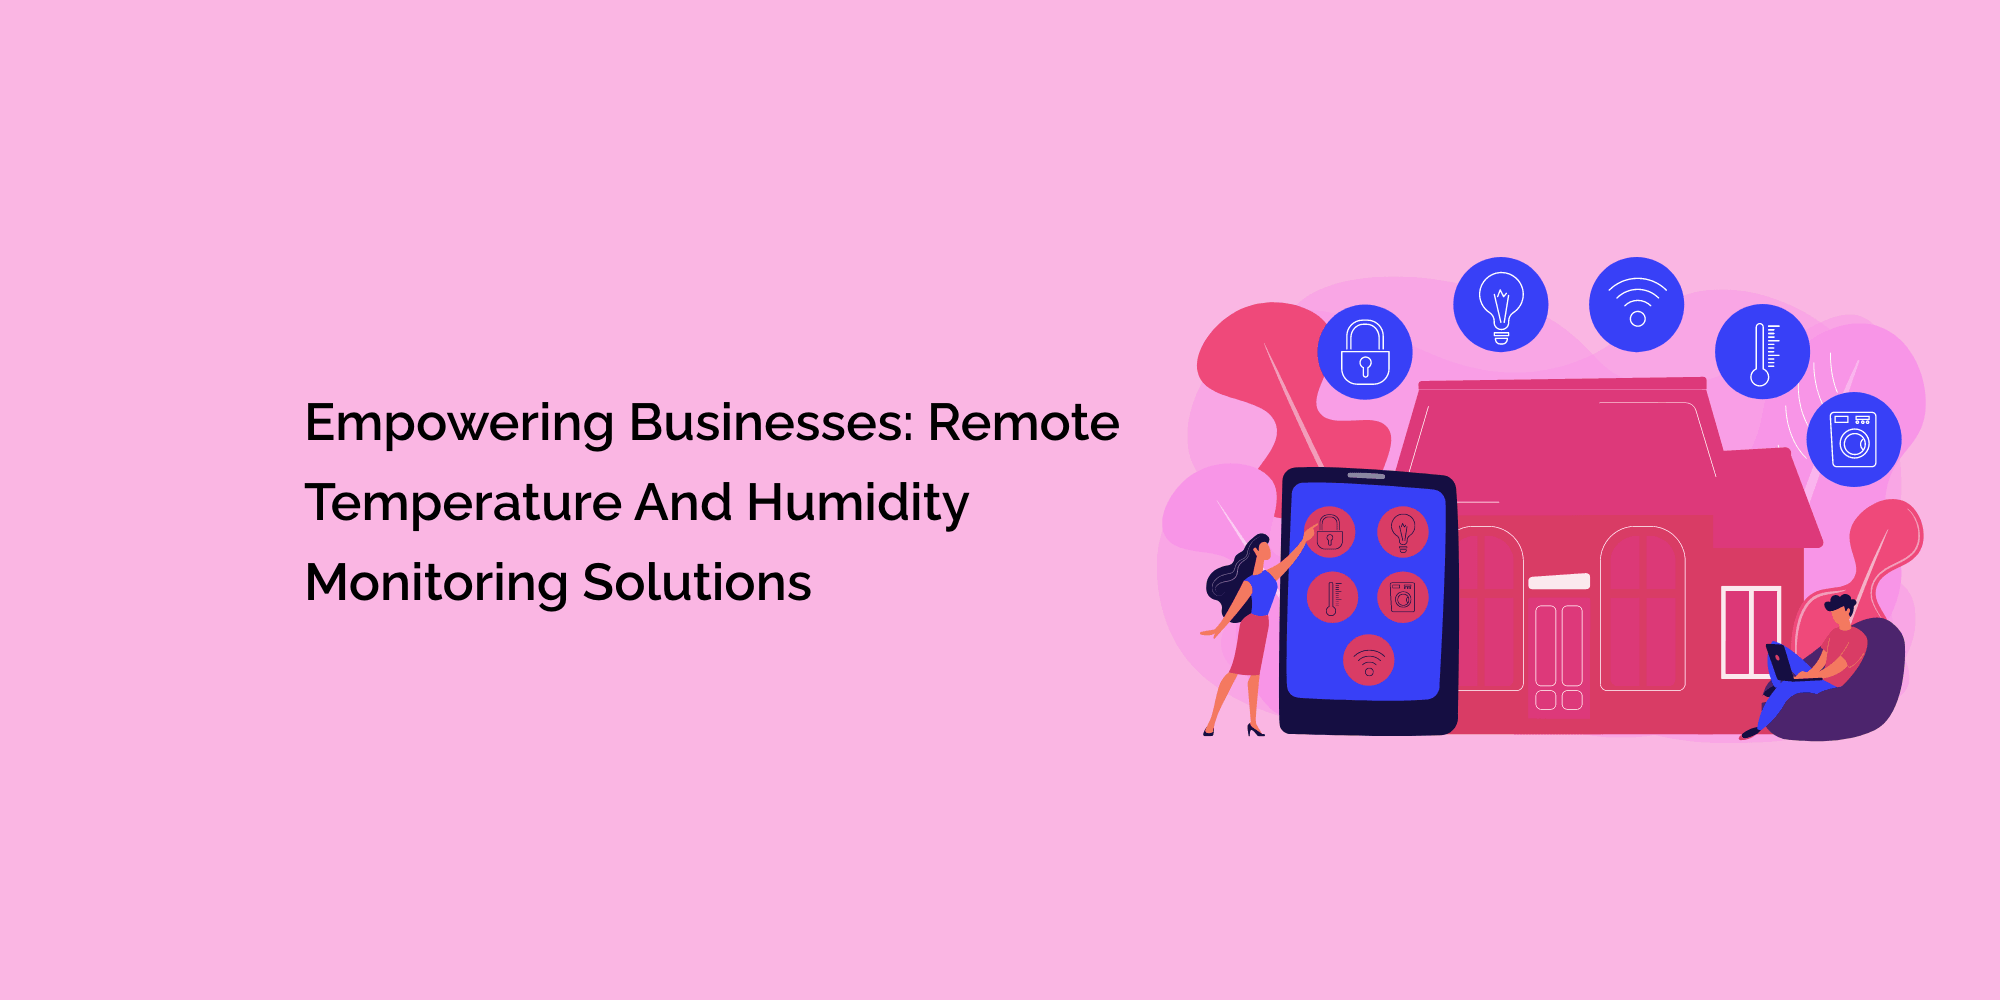 Empowering Businesses: Remote Temperature and Humidity Monitoring Solutions